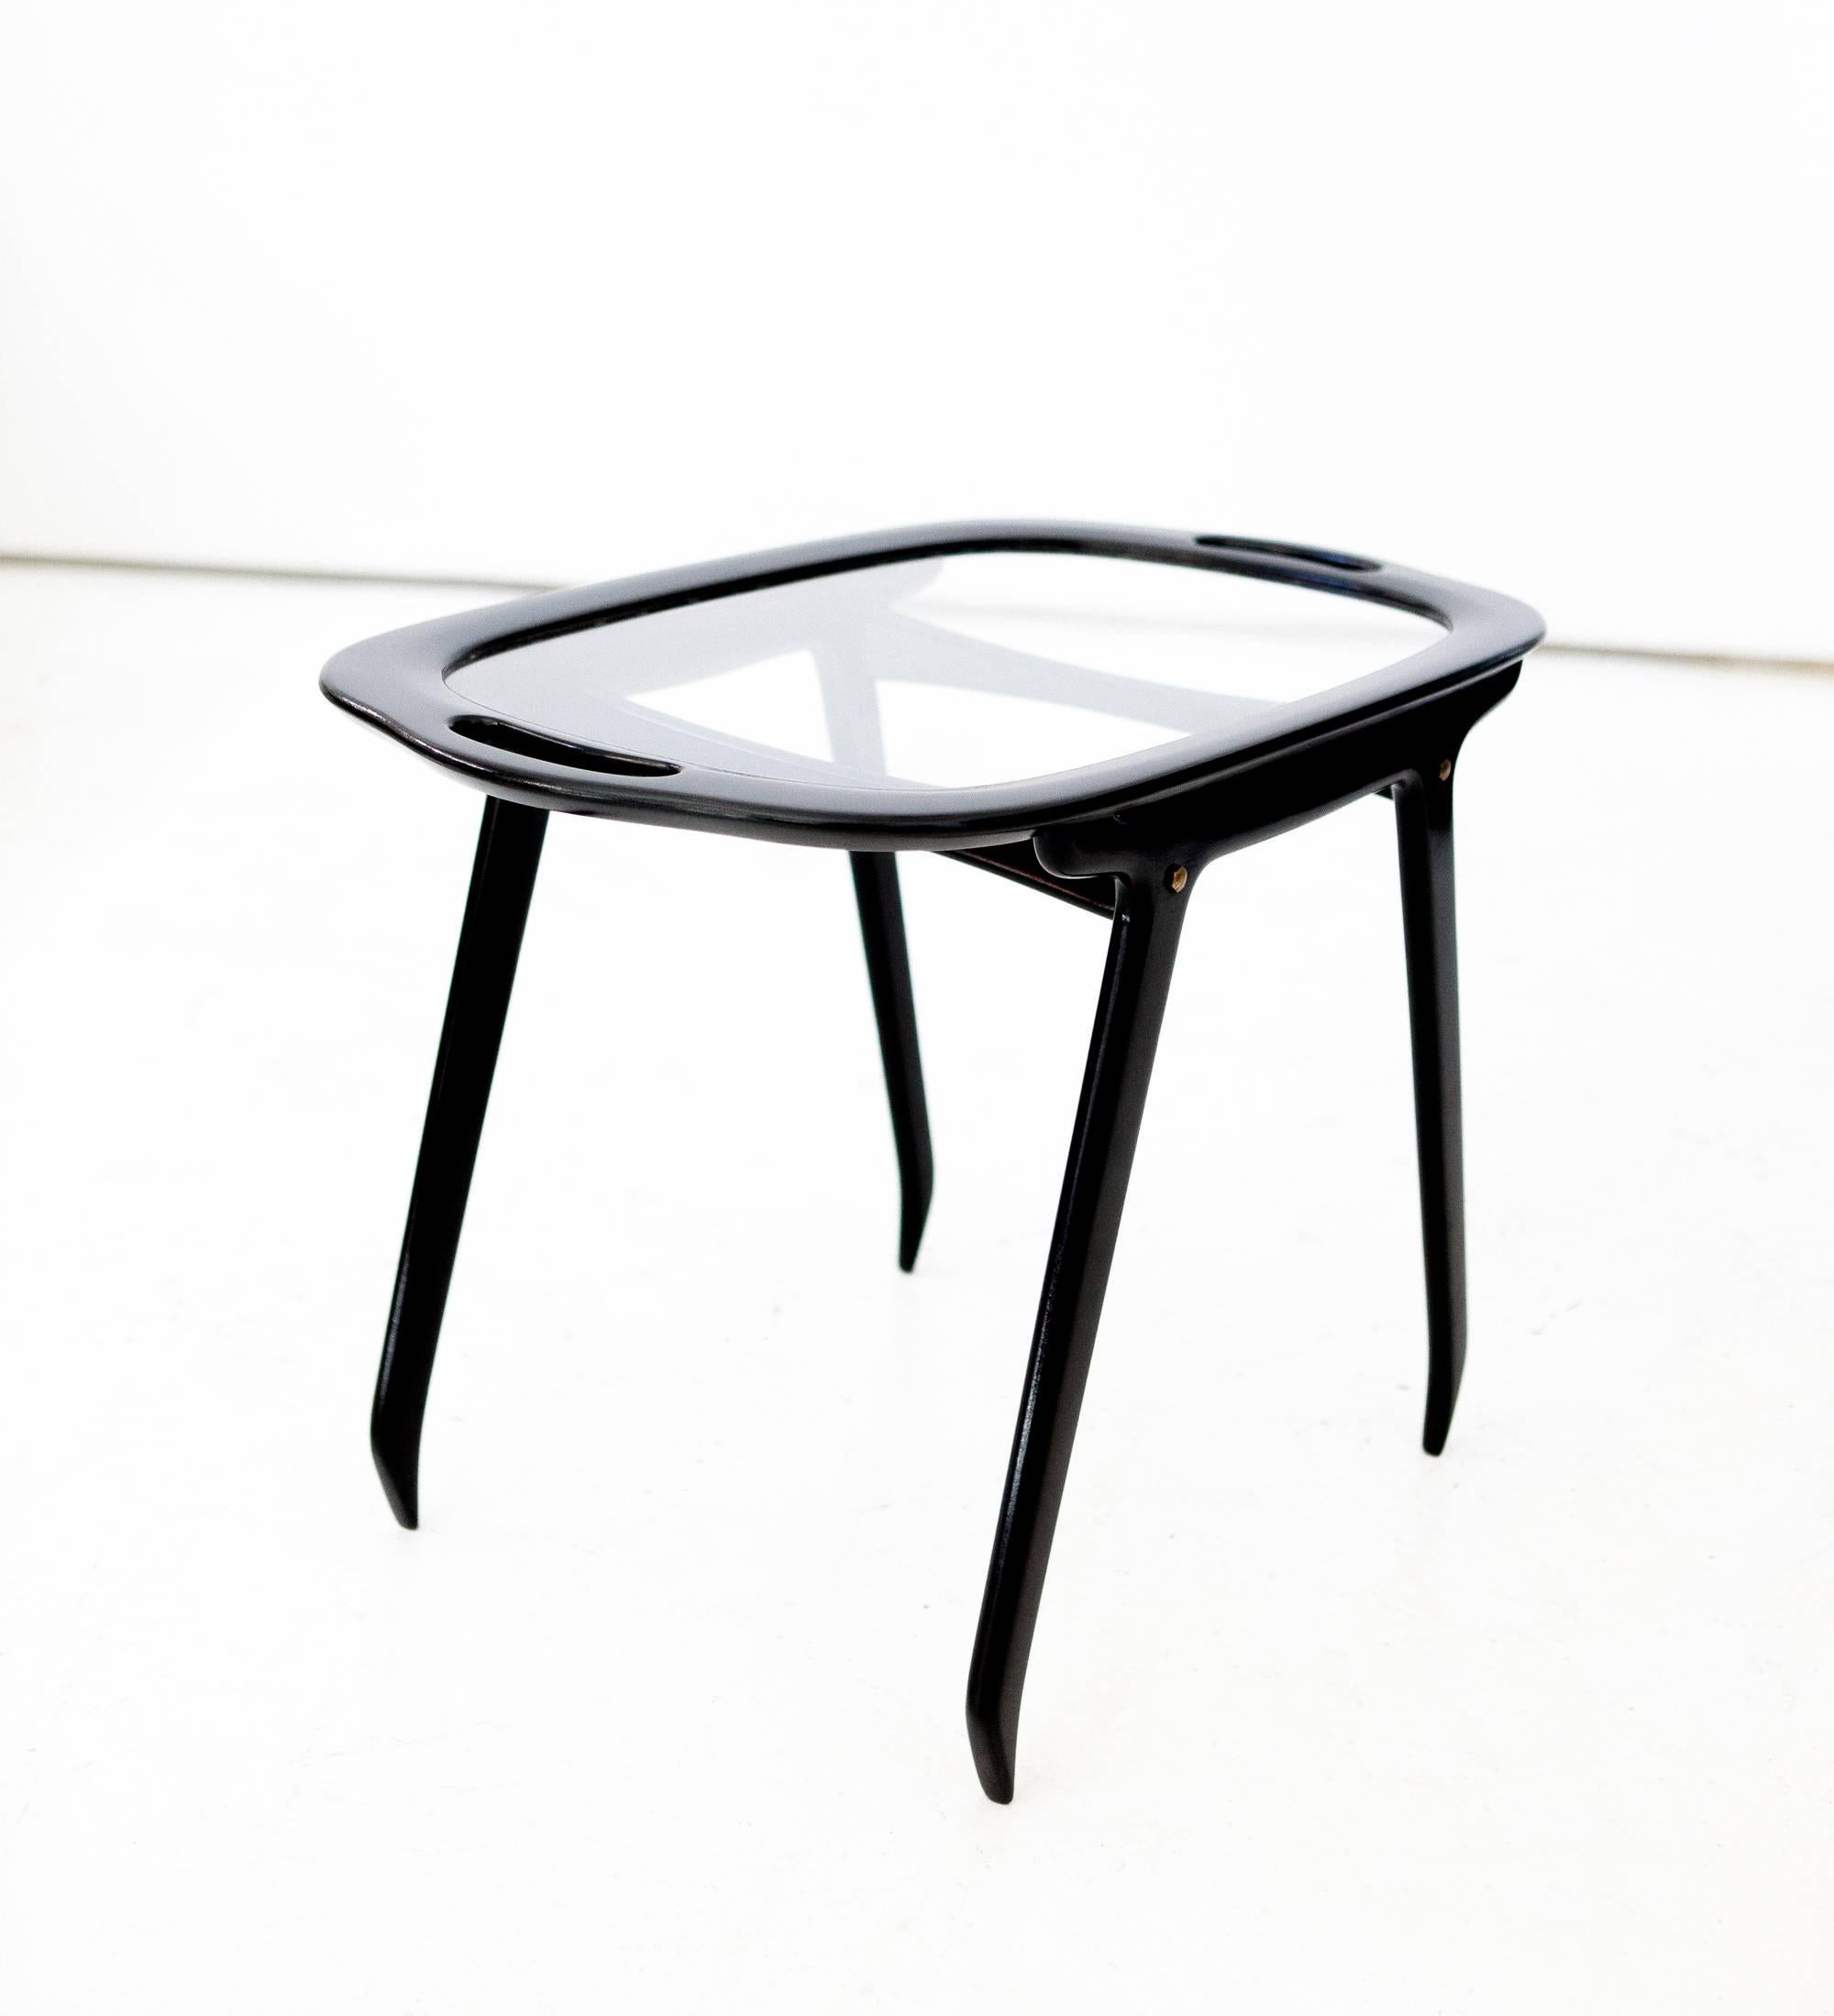 Italian Black Wood and Glass Coffee or Service Table by Cesare Lacca, 1950s (Italienisch)